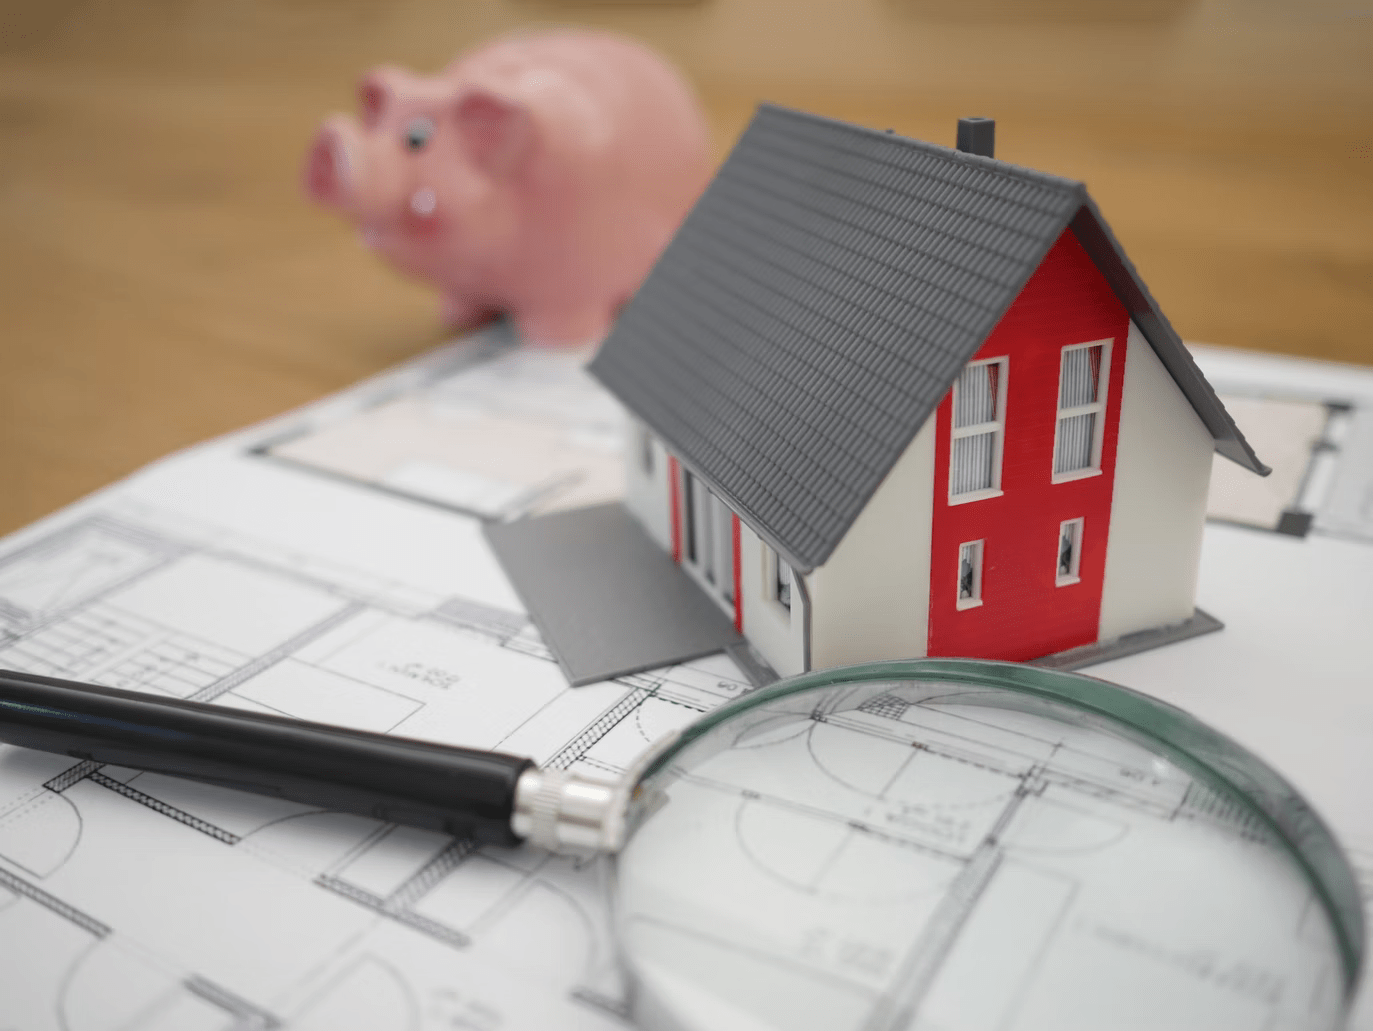 piggy bank in the form of a small pink pig and documents on the table